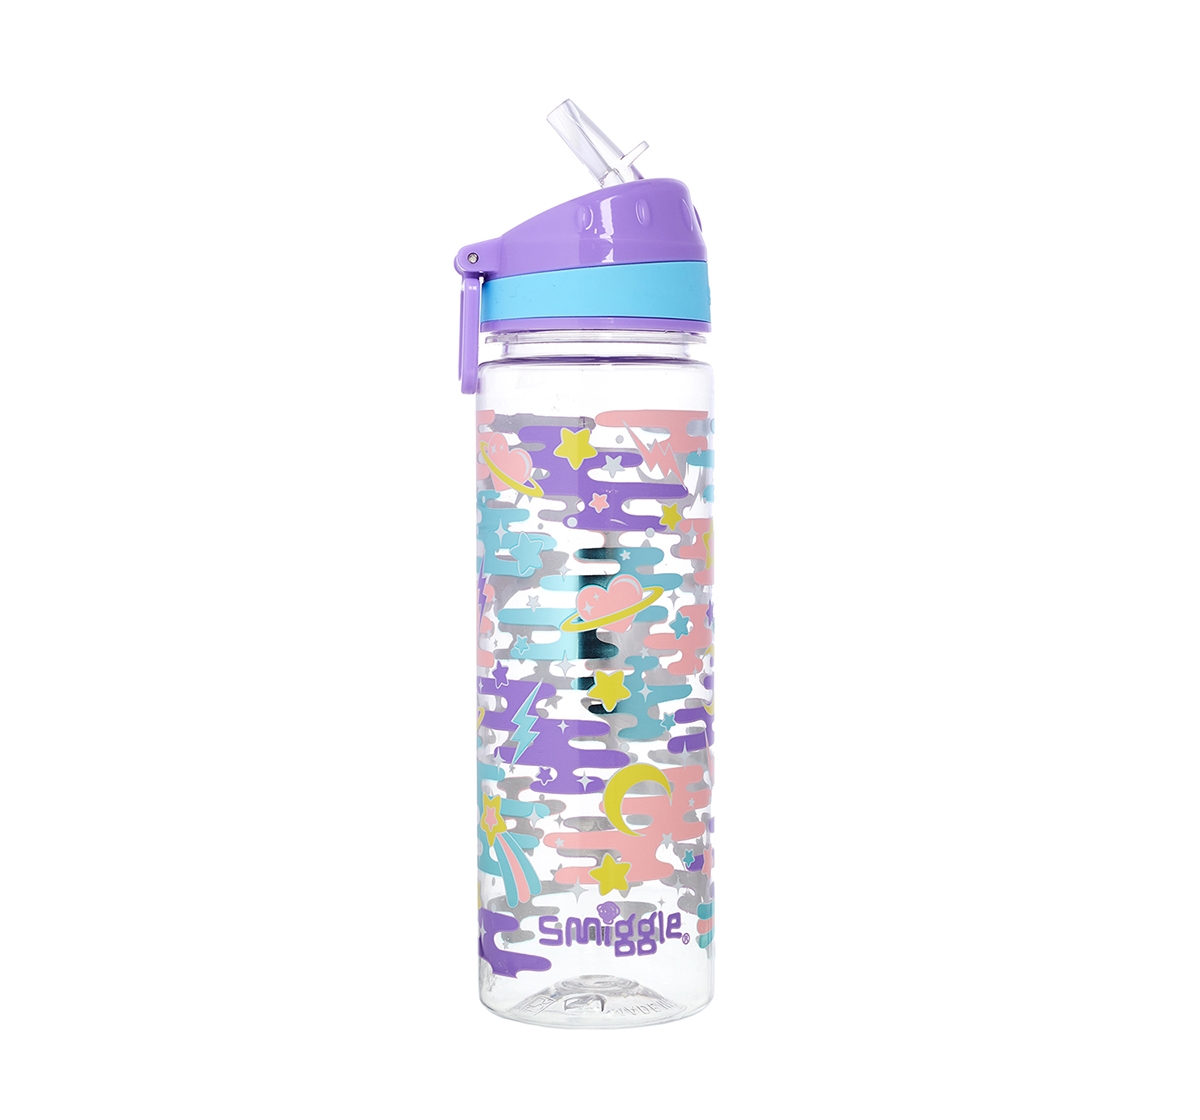 Smiggle | Smiggle Far Away Drink Bottle with Flip Top Spout - Cat Print Bags for Kids age 3Y+ (Lilac)